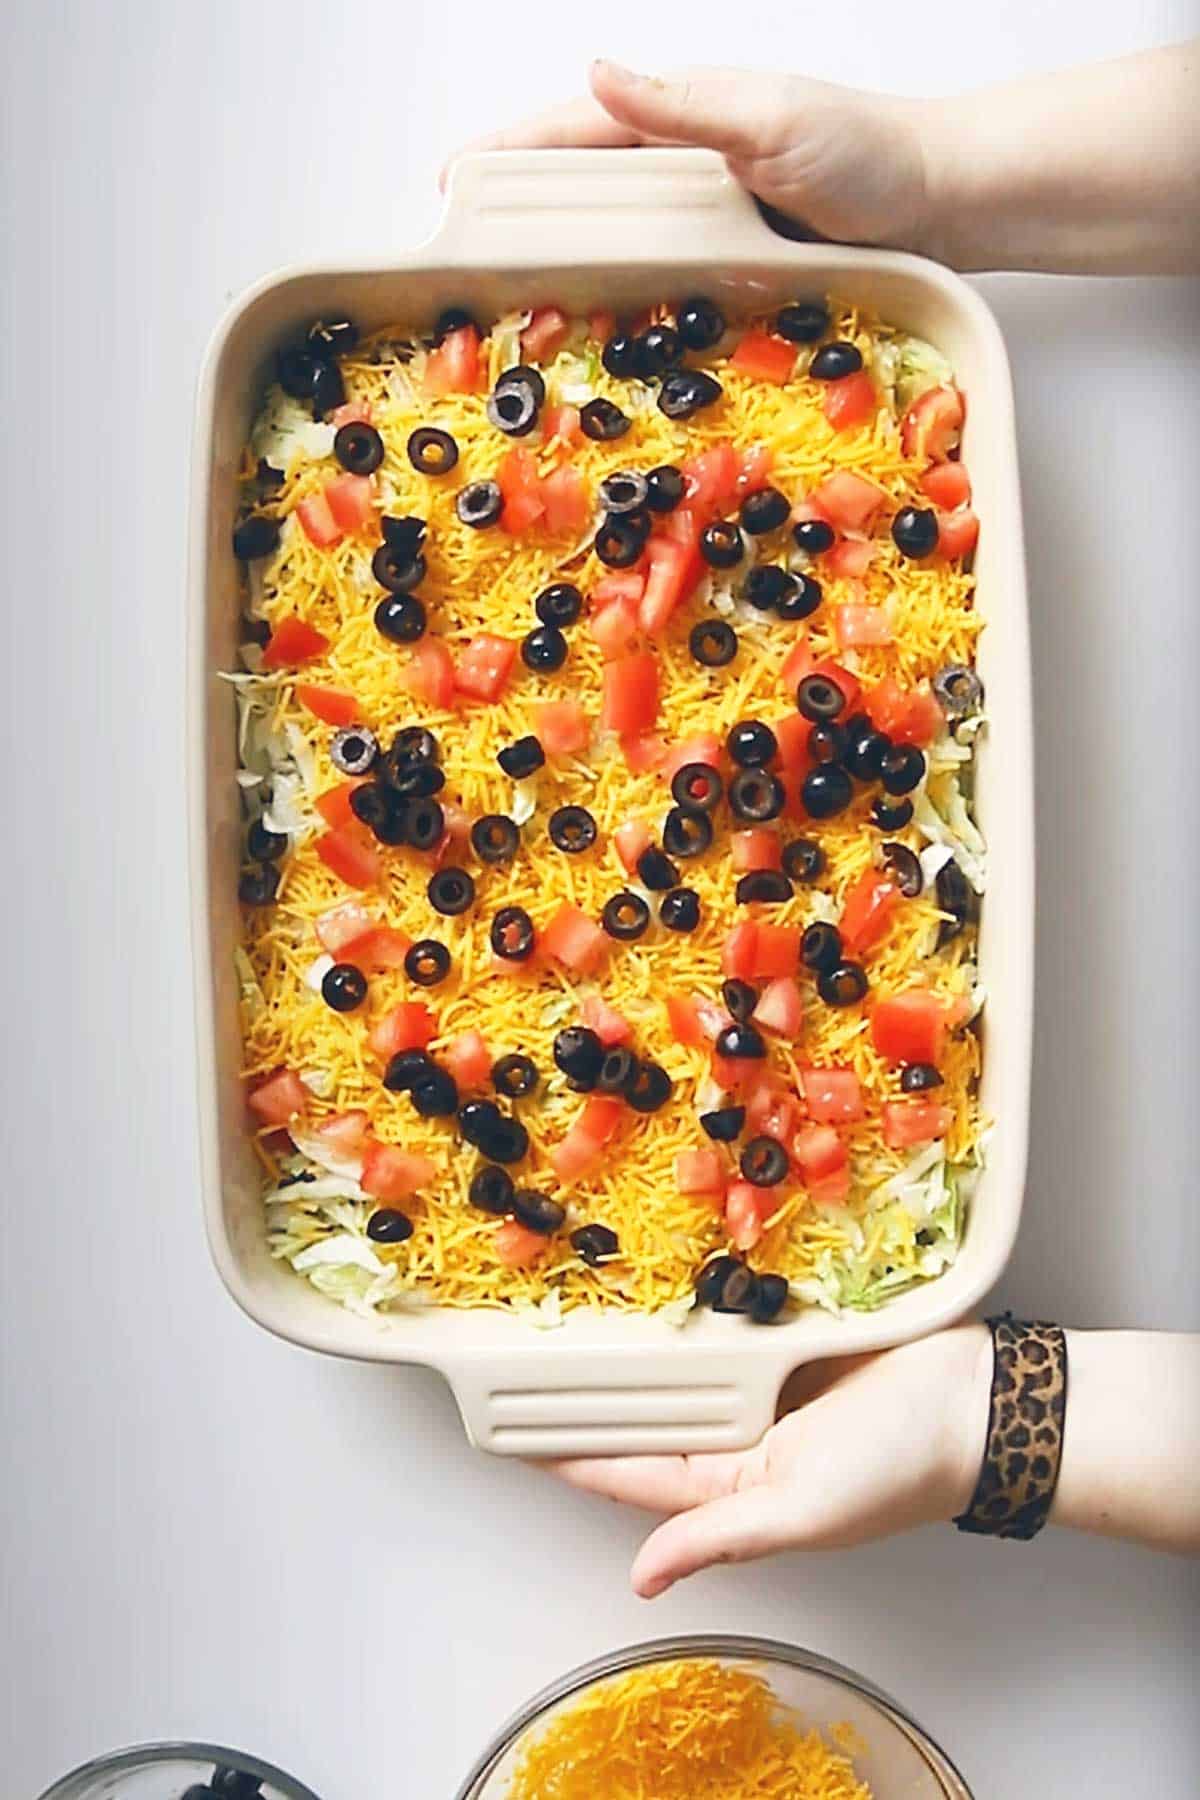 keto 7 layer dip in a white dish held by a person's hands.